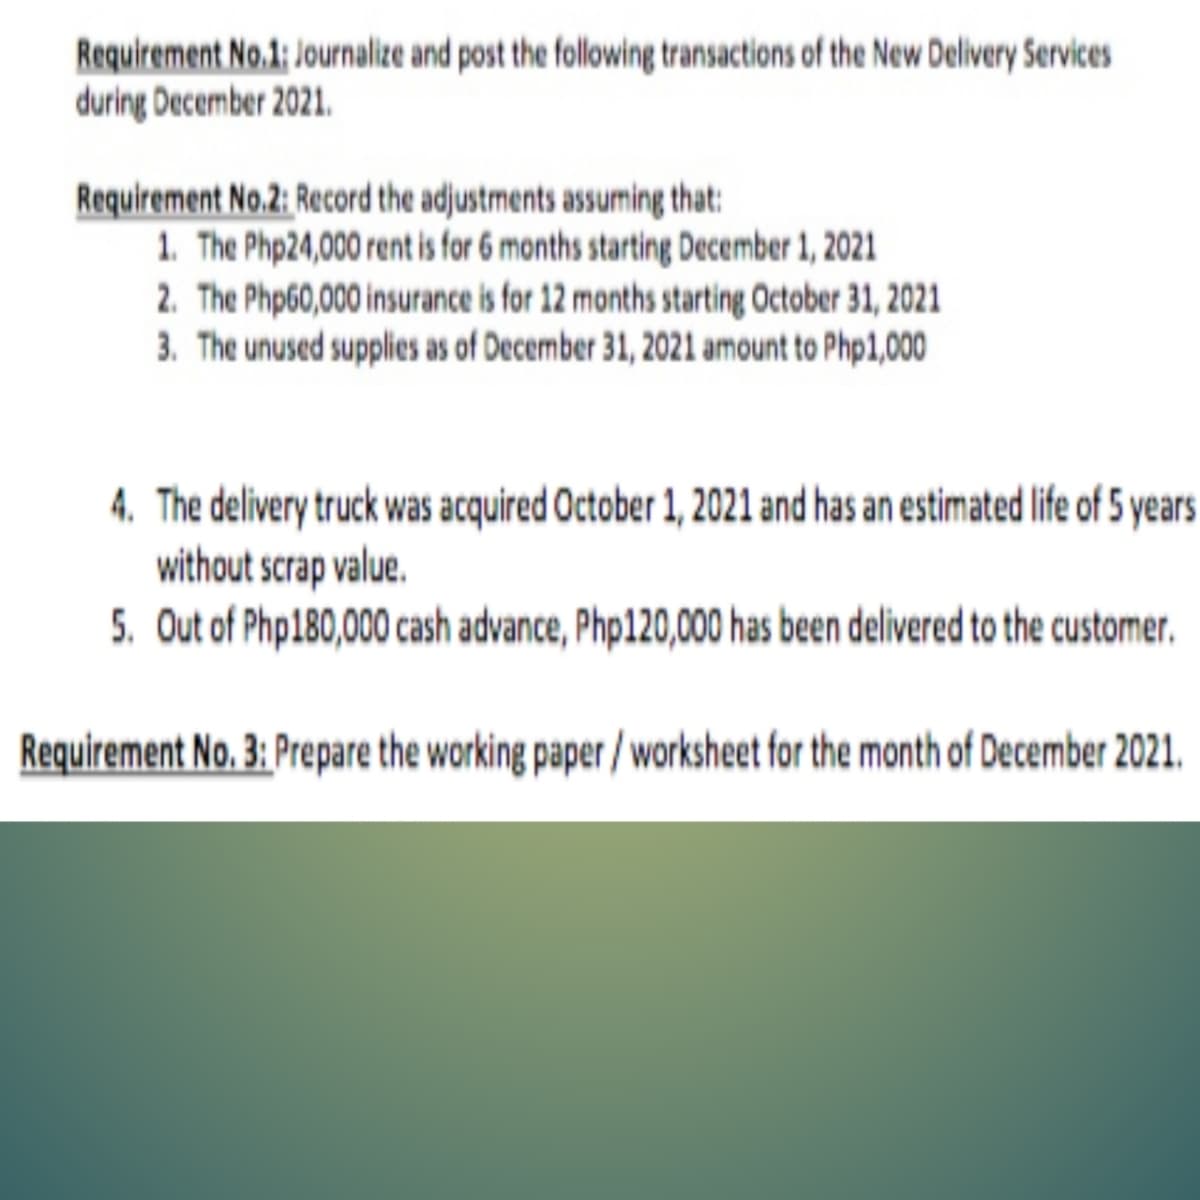 Requirement No.1; Journalize and post the following transactions of the New Delivery Services
during December 2021.
Requirement No.2: Record the adjustments assuming that:
1. The Php24,000 rent is for 6 months starting December 1, 2021
2. The Php60,000 insurance is for 12 months starting October 31, 2021
3. The unused supplies as of December 31, 2021 amount to Php1,000
4. The delivery truck was acquired October 1, 2021 and has an estimated life of 5 years
without scrap value.
5. Out of Php180,000 cash advance, Php120,00 has been delivered to the customer.
Requirement No. 3: Prepare the working paper/worksheet for the month of December 2021.
